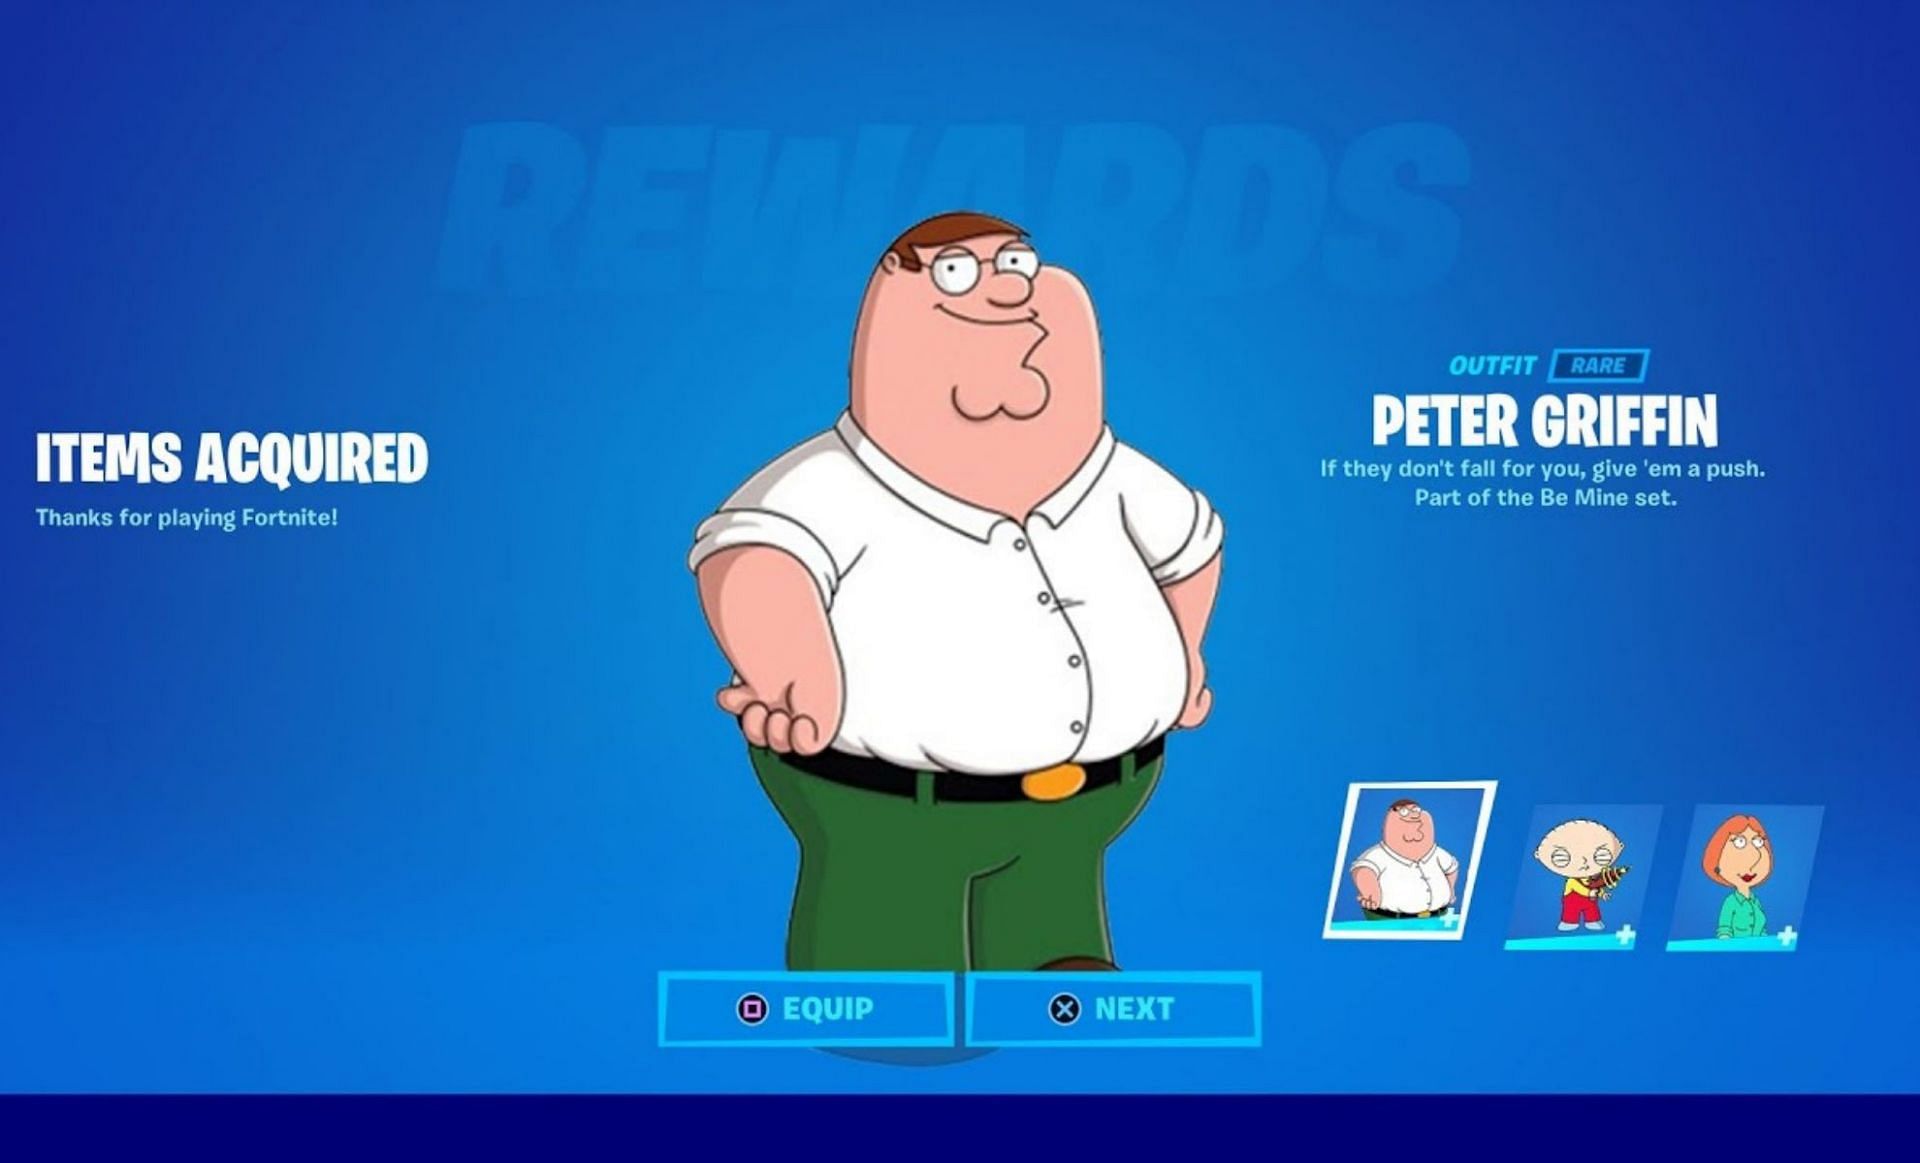 Peter Griffin skin (Image via Pack A Puncher on YouTube)